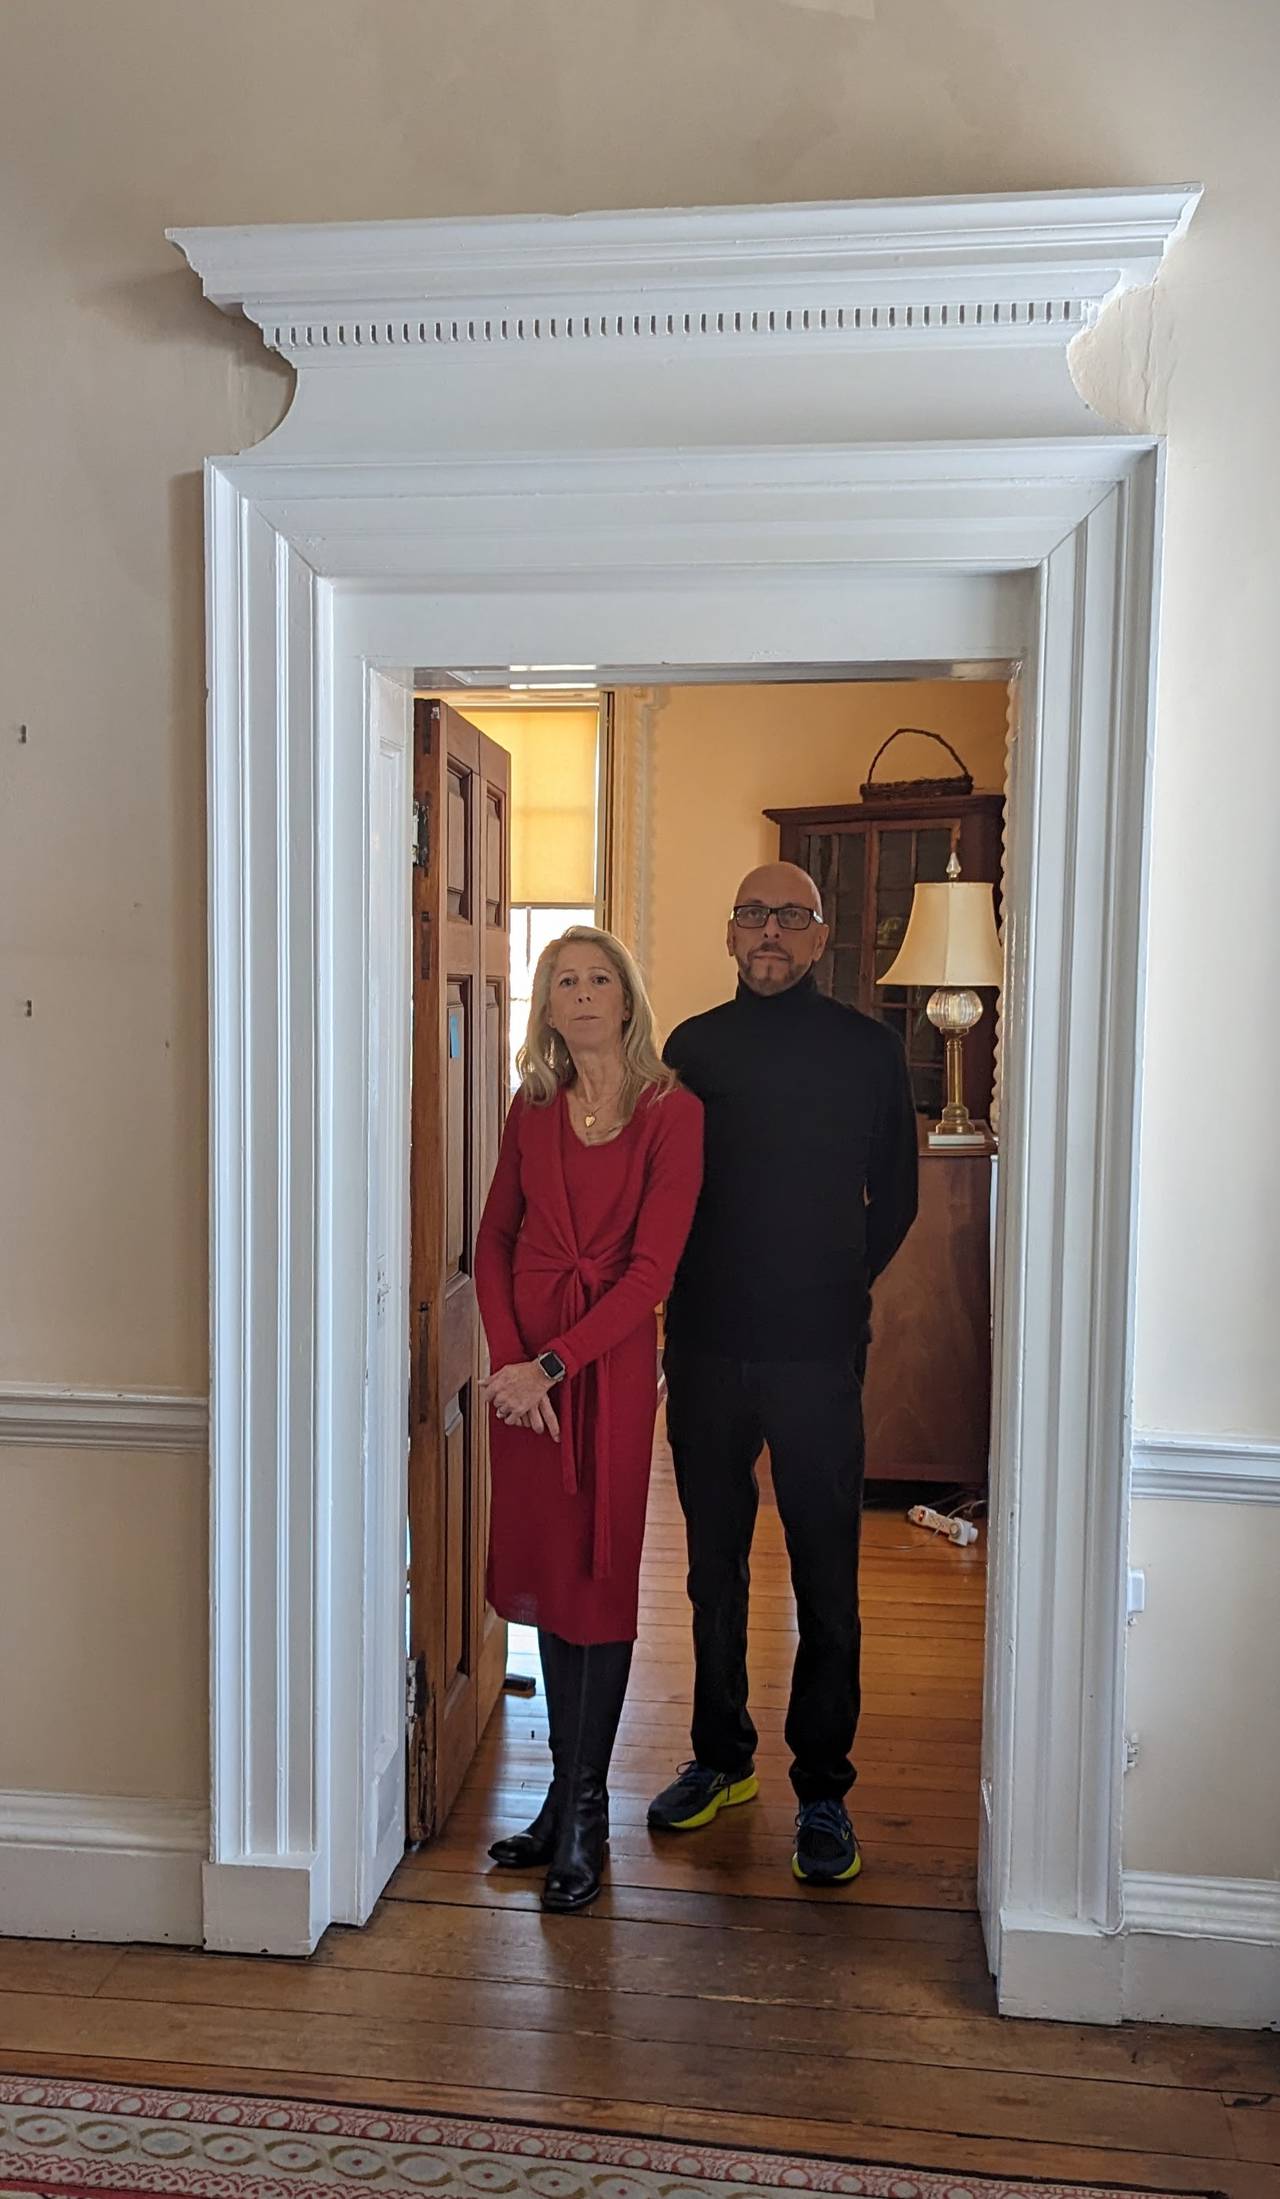 Heather East, executive director of the nonprofit Chase Home Foundation, and David Michaels, director of women's programming and preservation, inside the historic Chase-Lloyd Home. Five years after the last women were moved out of the shelter, there are no plans to continue its historic role as a home of last resort.